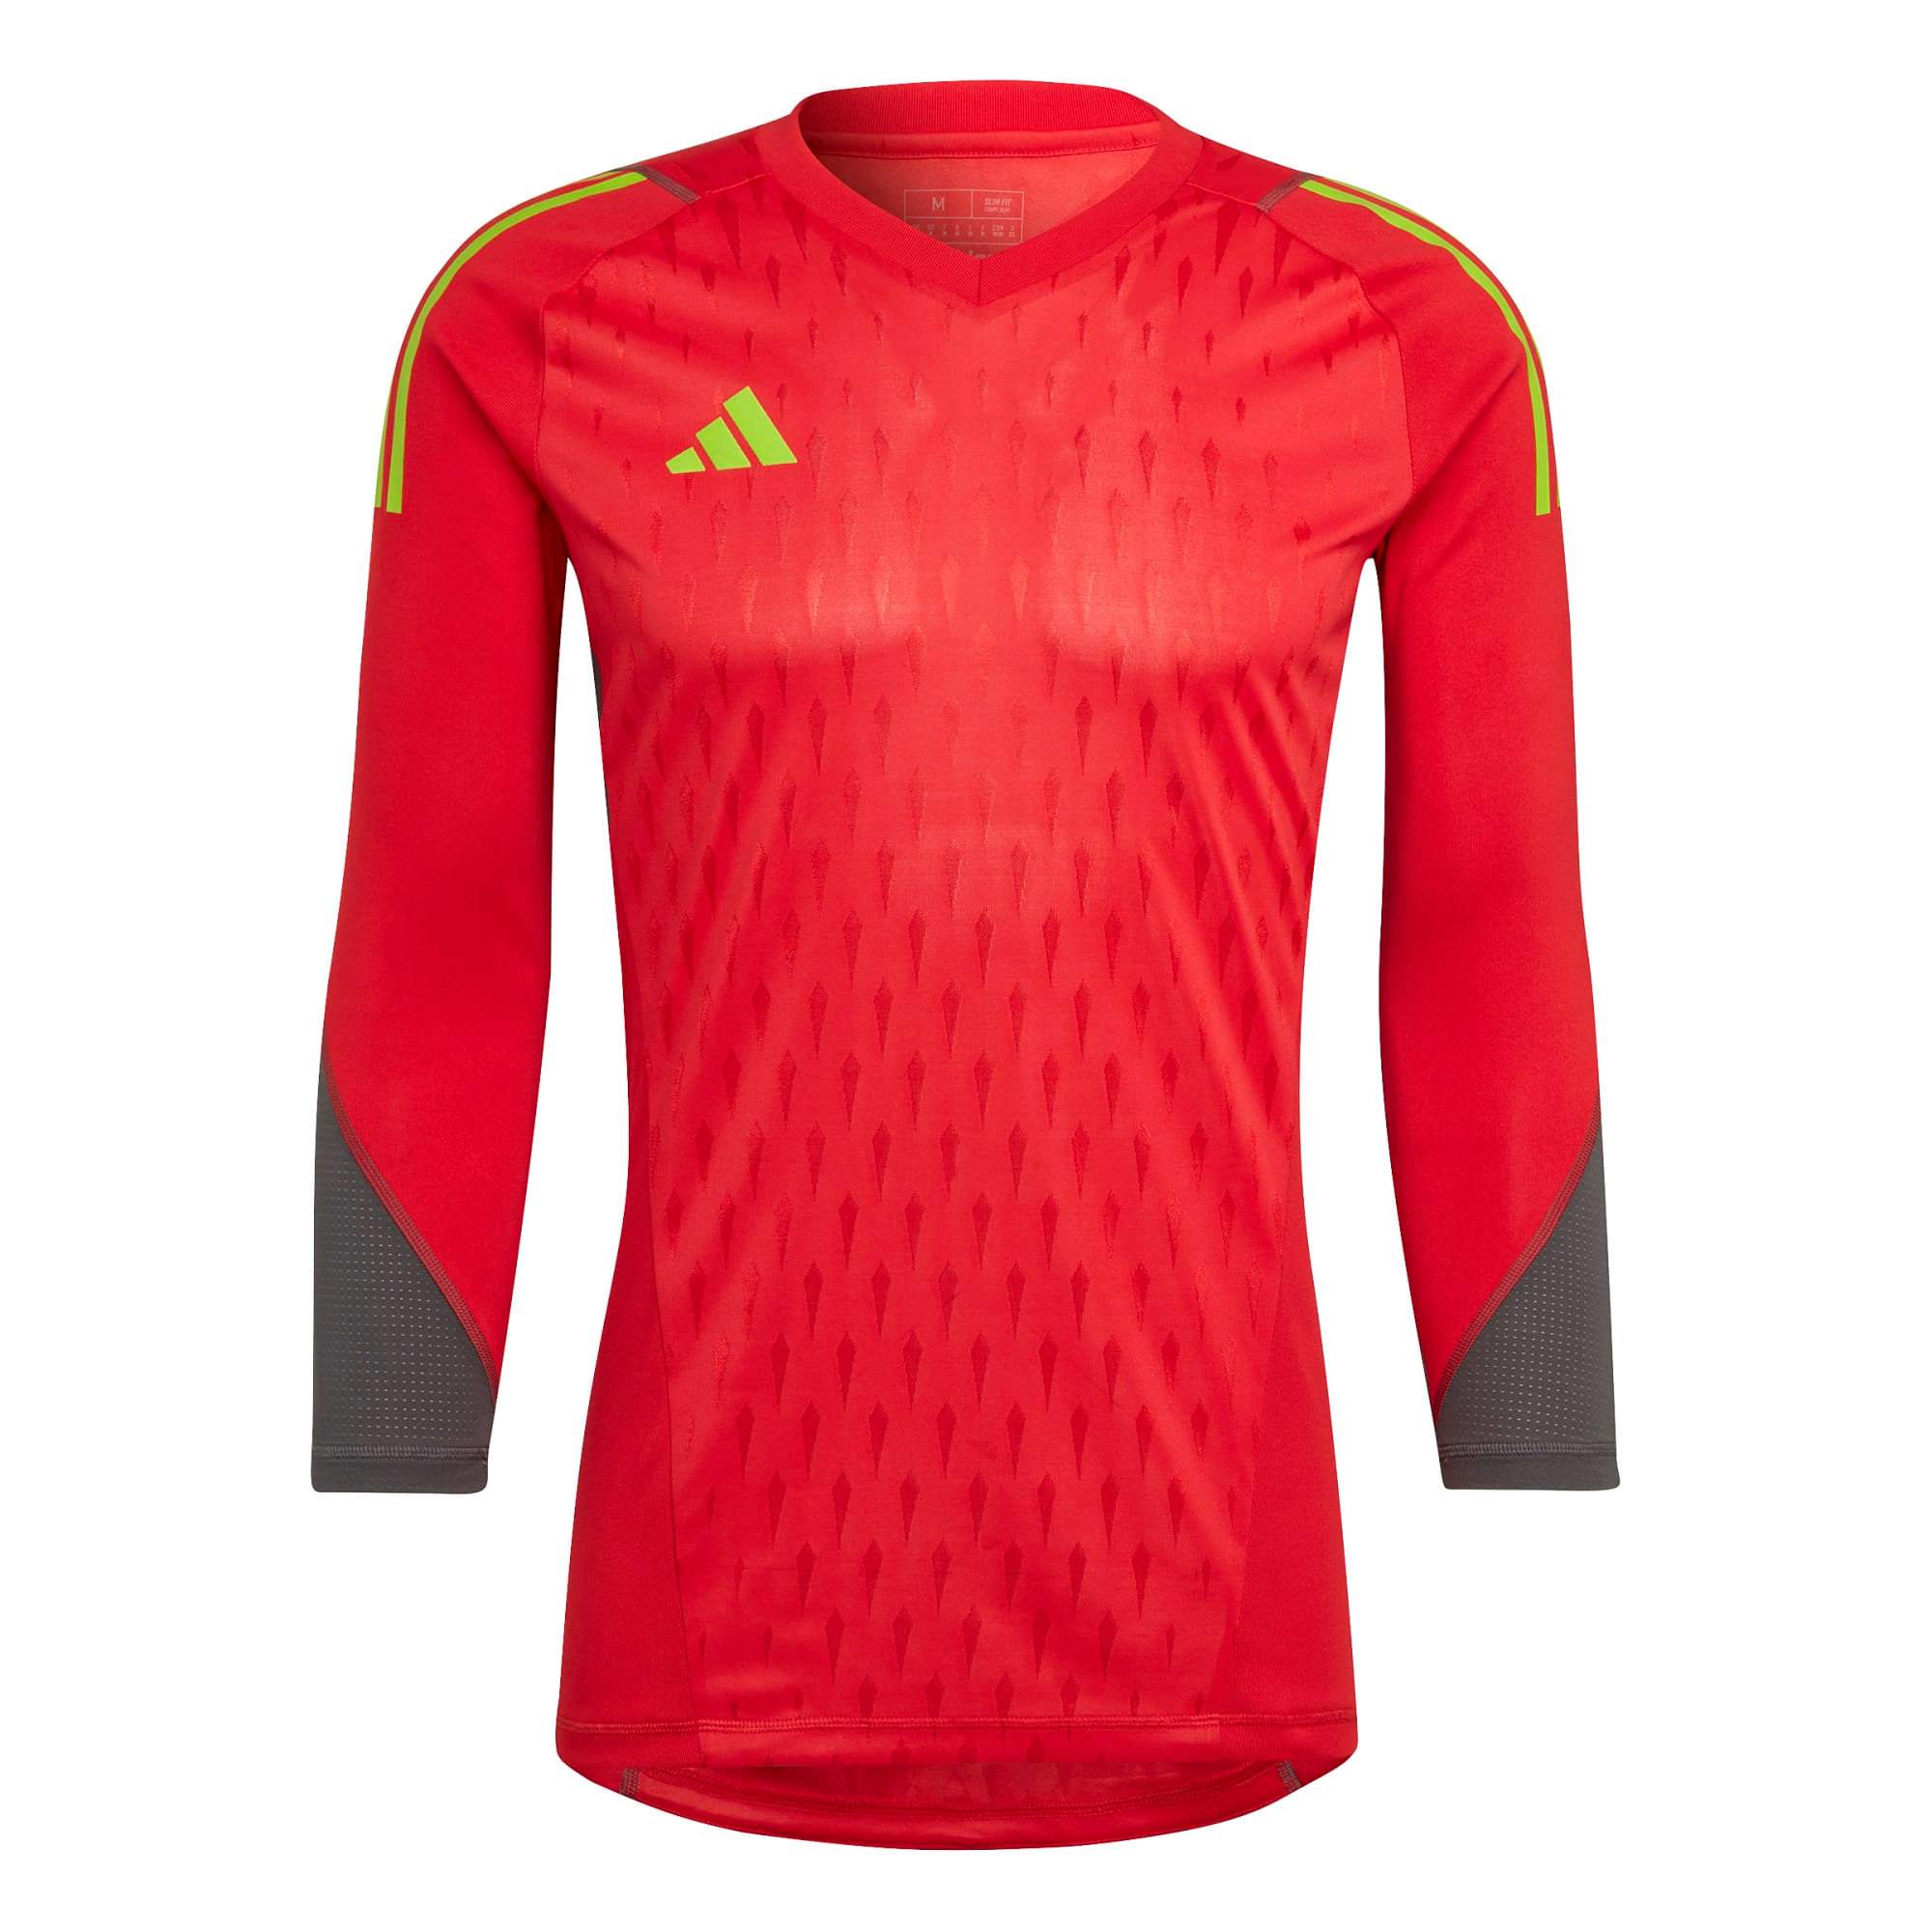 ADIDAS T23 PROMO GK JERSEY LS TEAM CORE RED